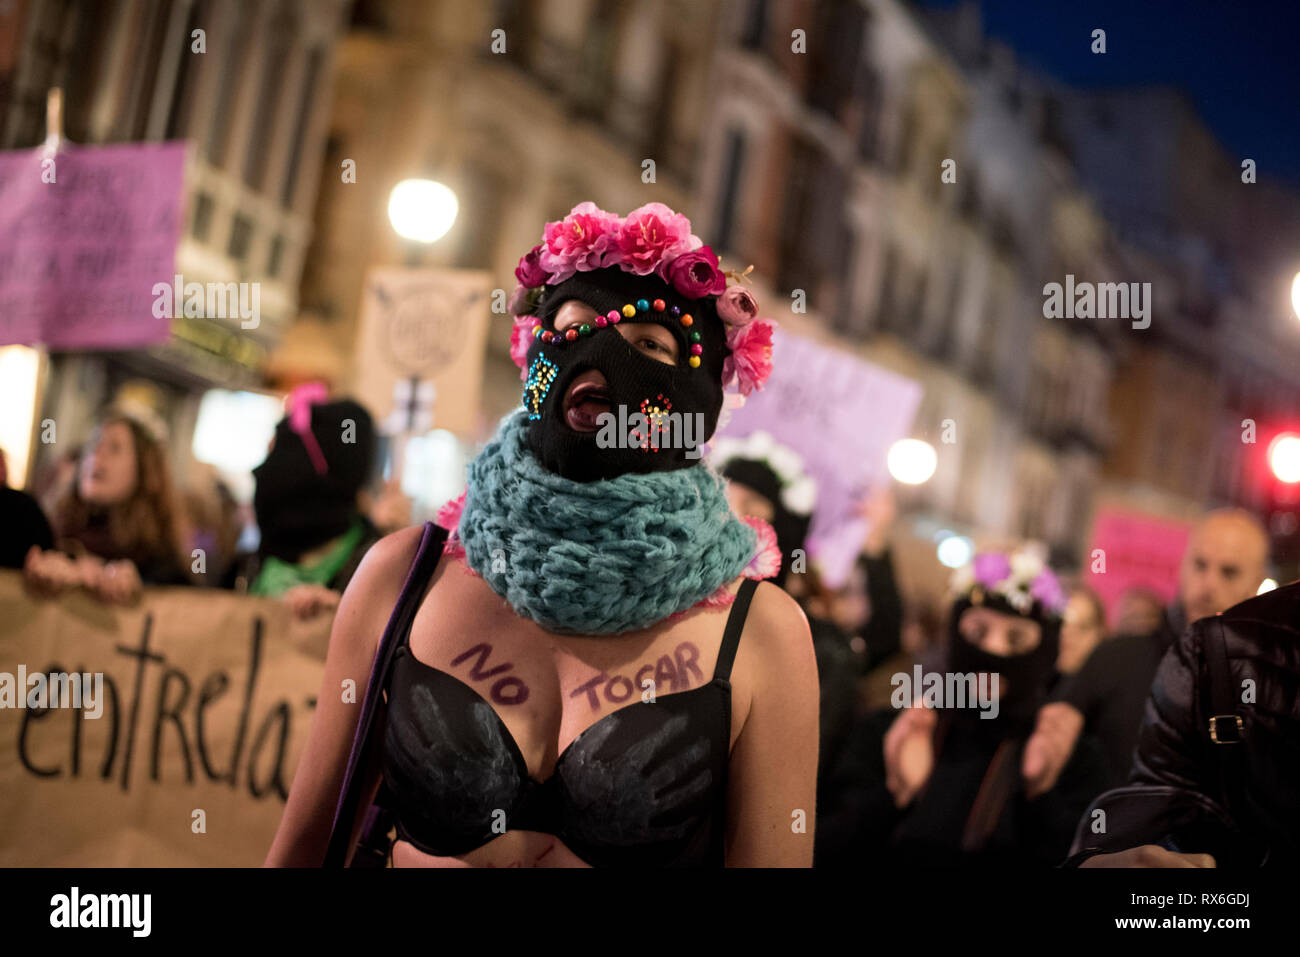 A protester with her face masked and wearing a bra is seen during